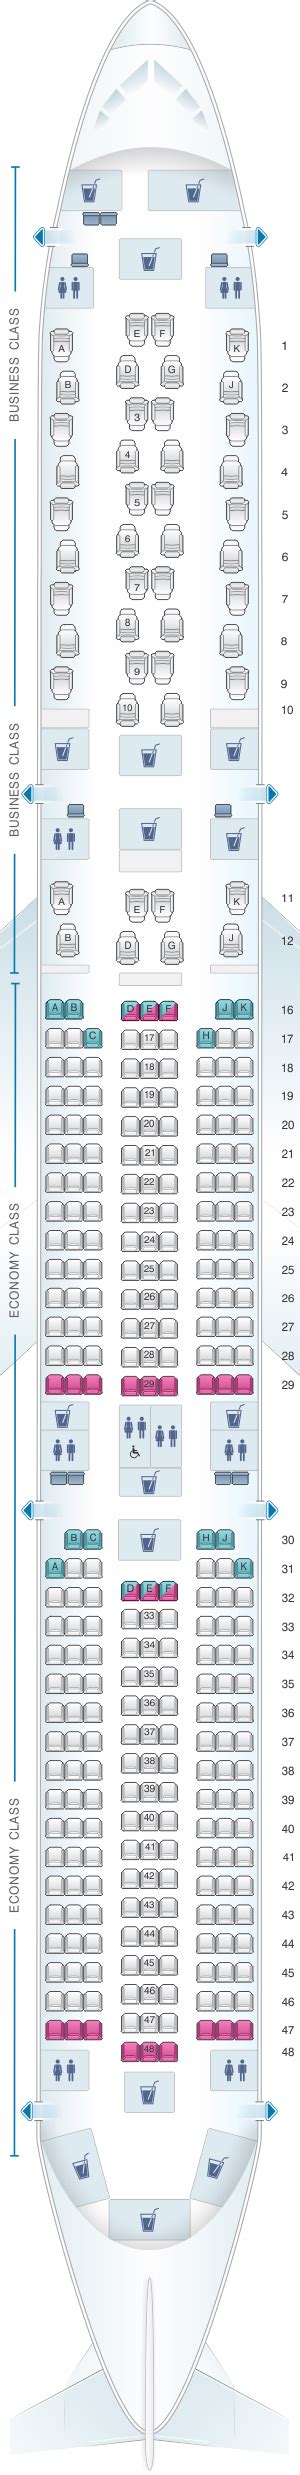 Seat Map For Qatar Airways Airbus A350 1000 Airplane Seats Best